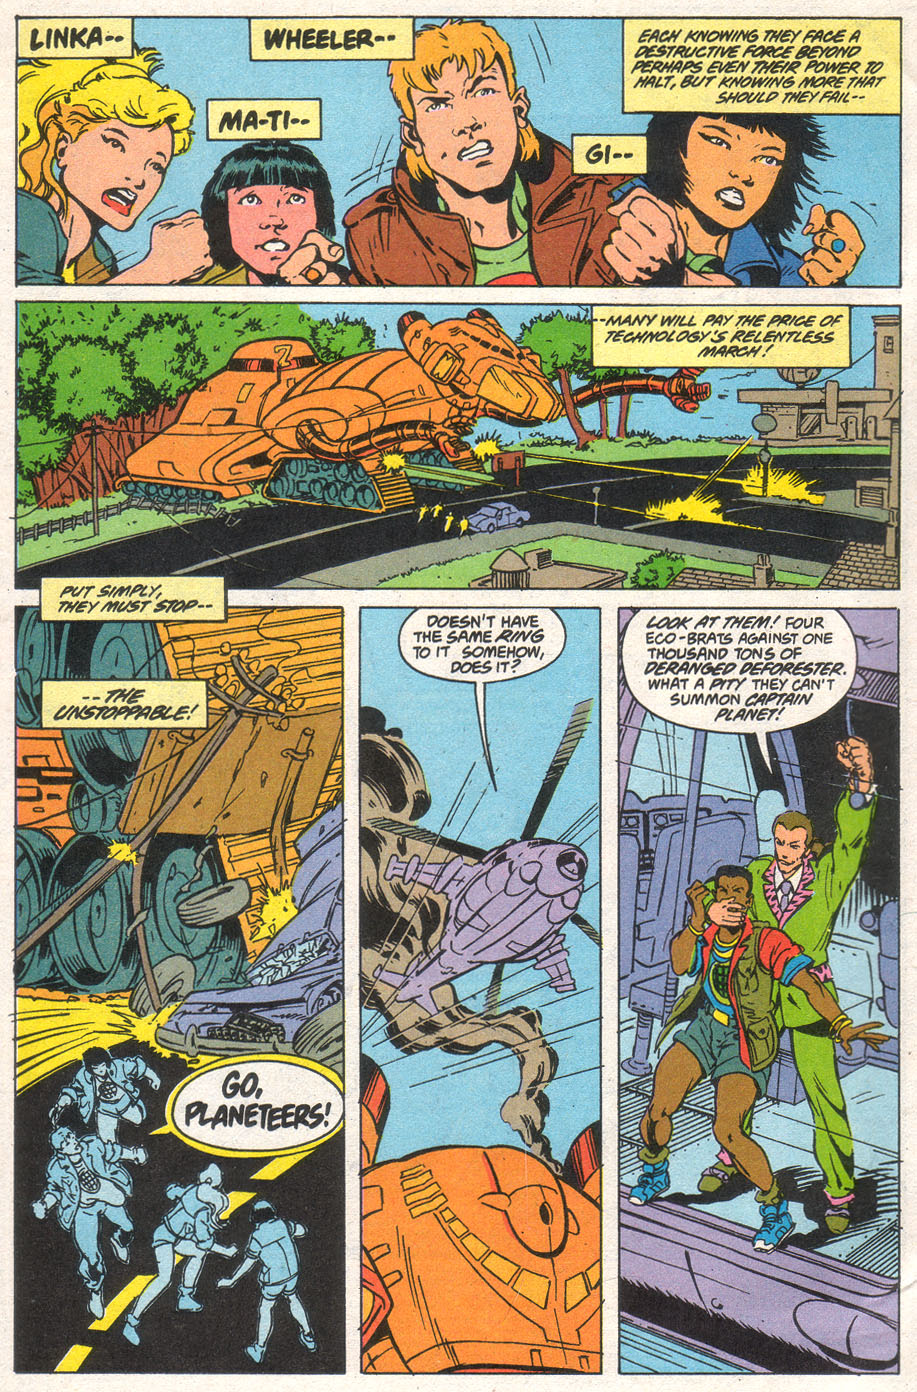 Captain Planet And The Planeteers Issue 12 | Read Captain Planet And The  Planeteers Issue 12 comic online in high quality. Read Full Comic online  for free - Read comics online in high quality .